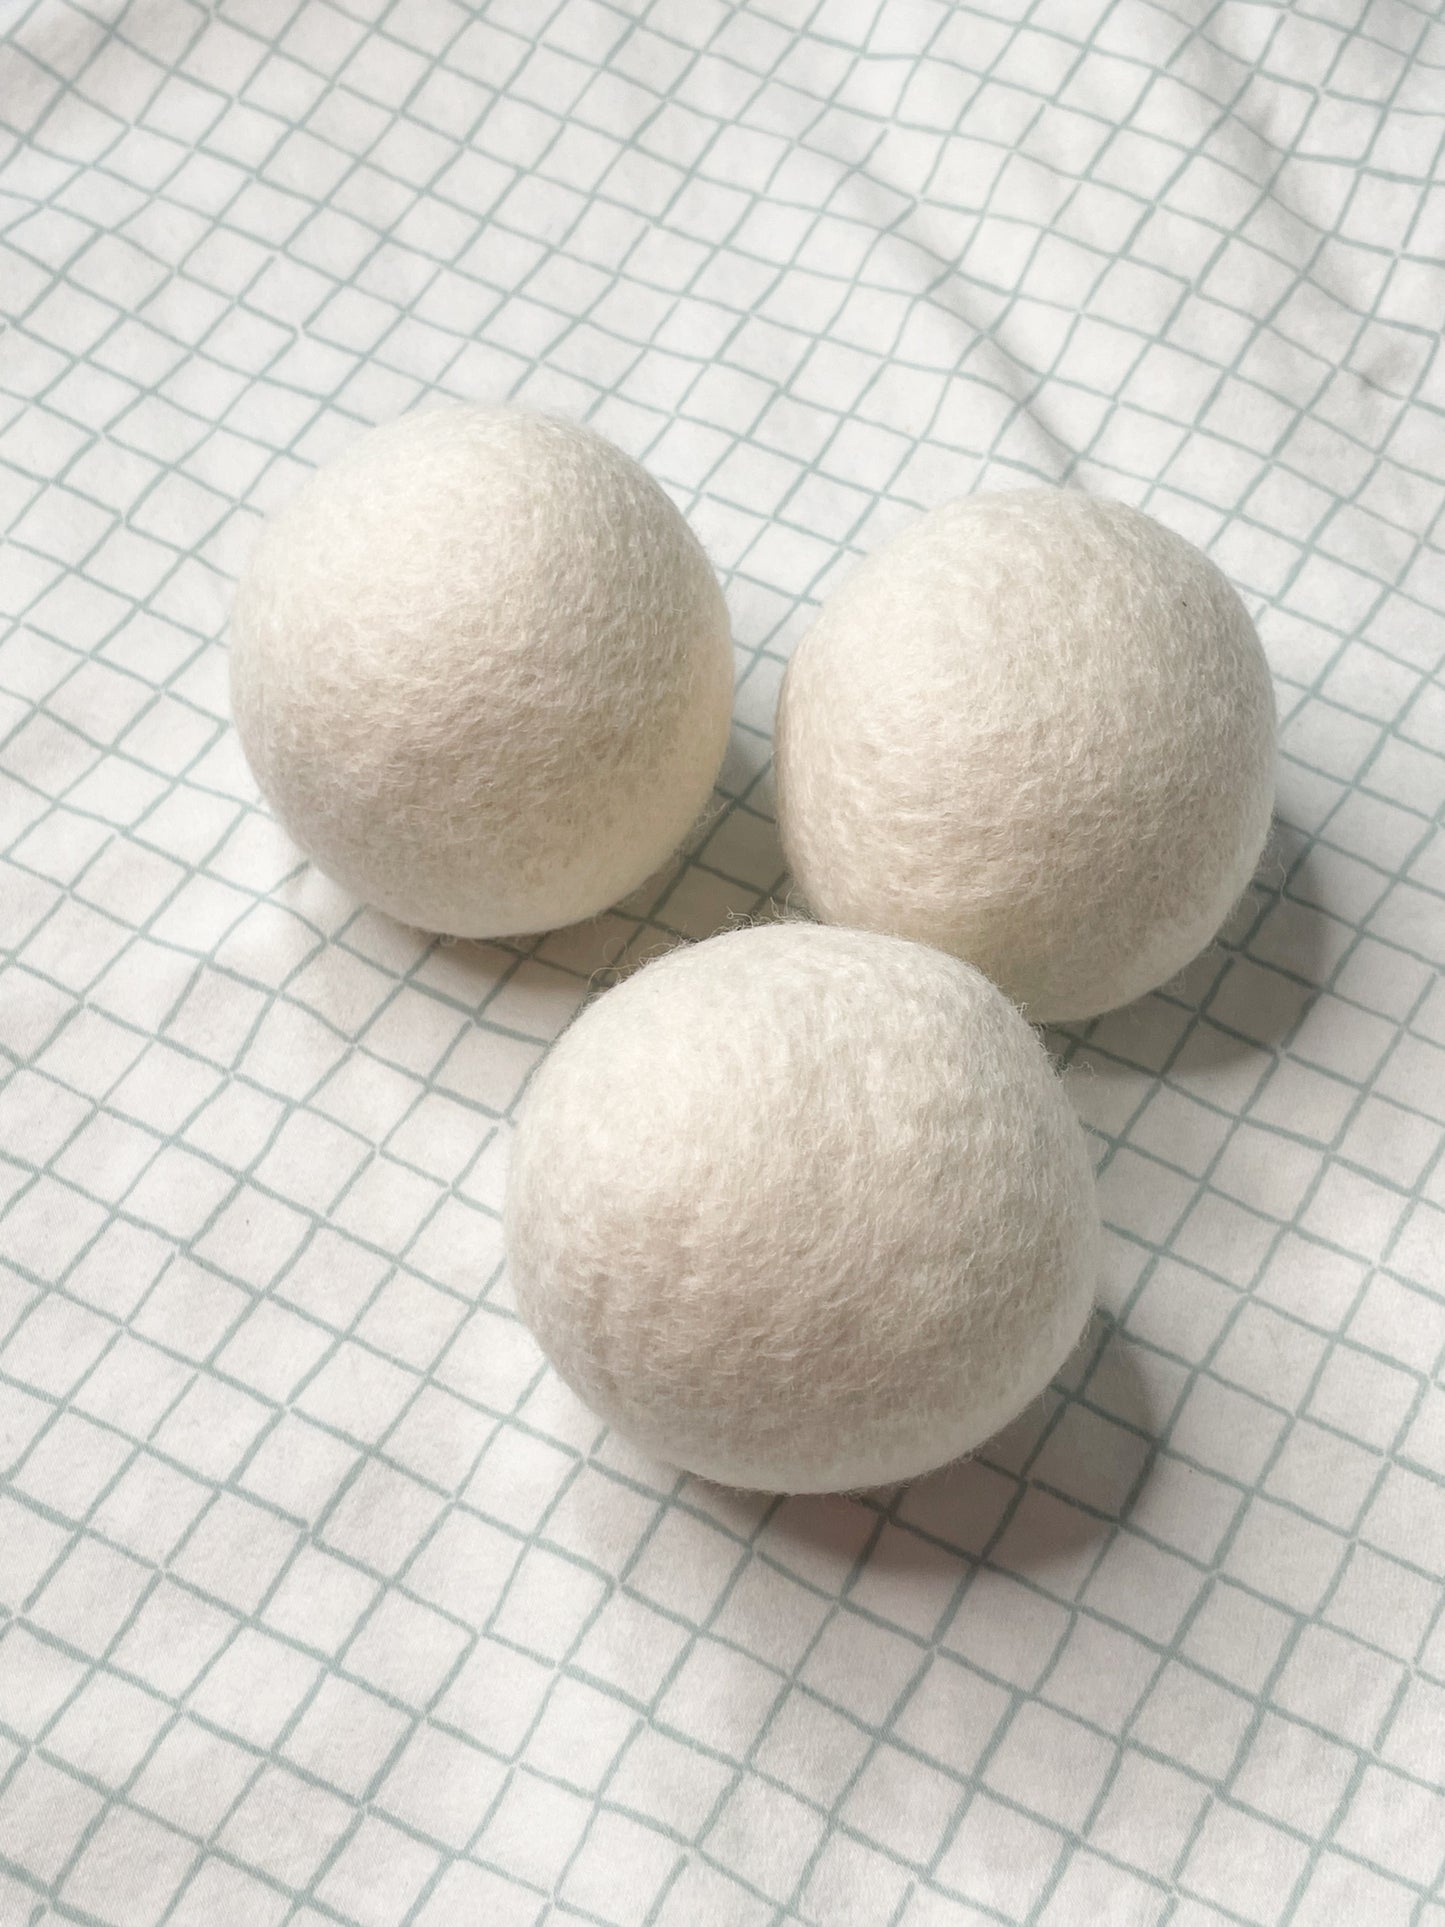 100% Pure Ethical Natural Dryer Balls - 3 Pack Made in Canada